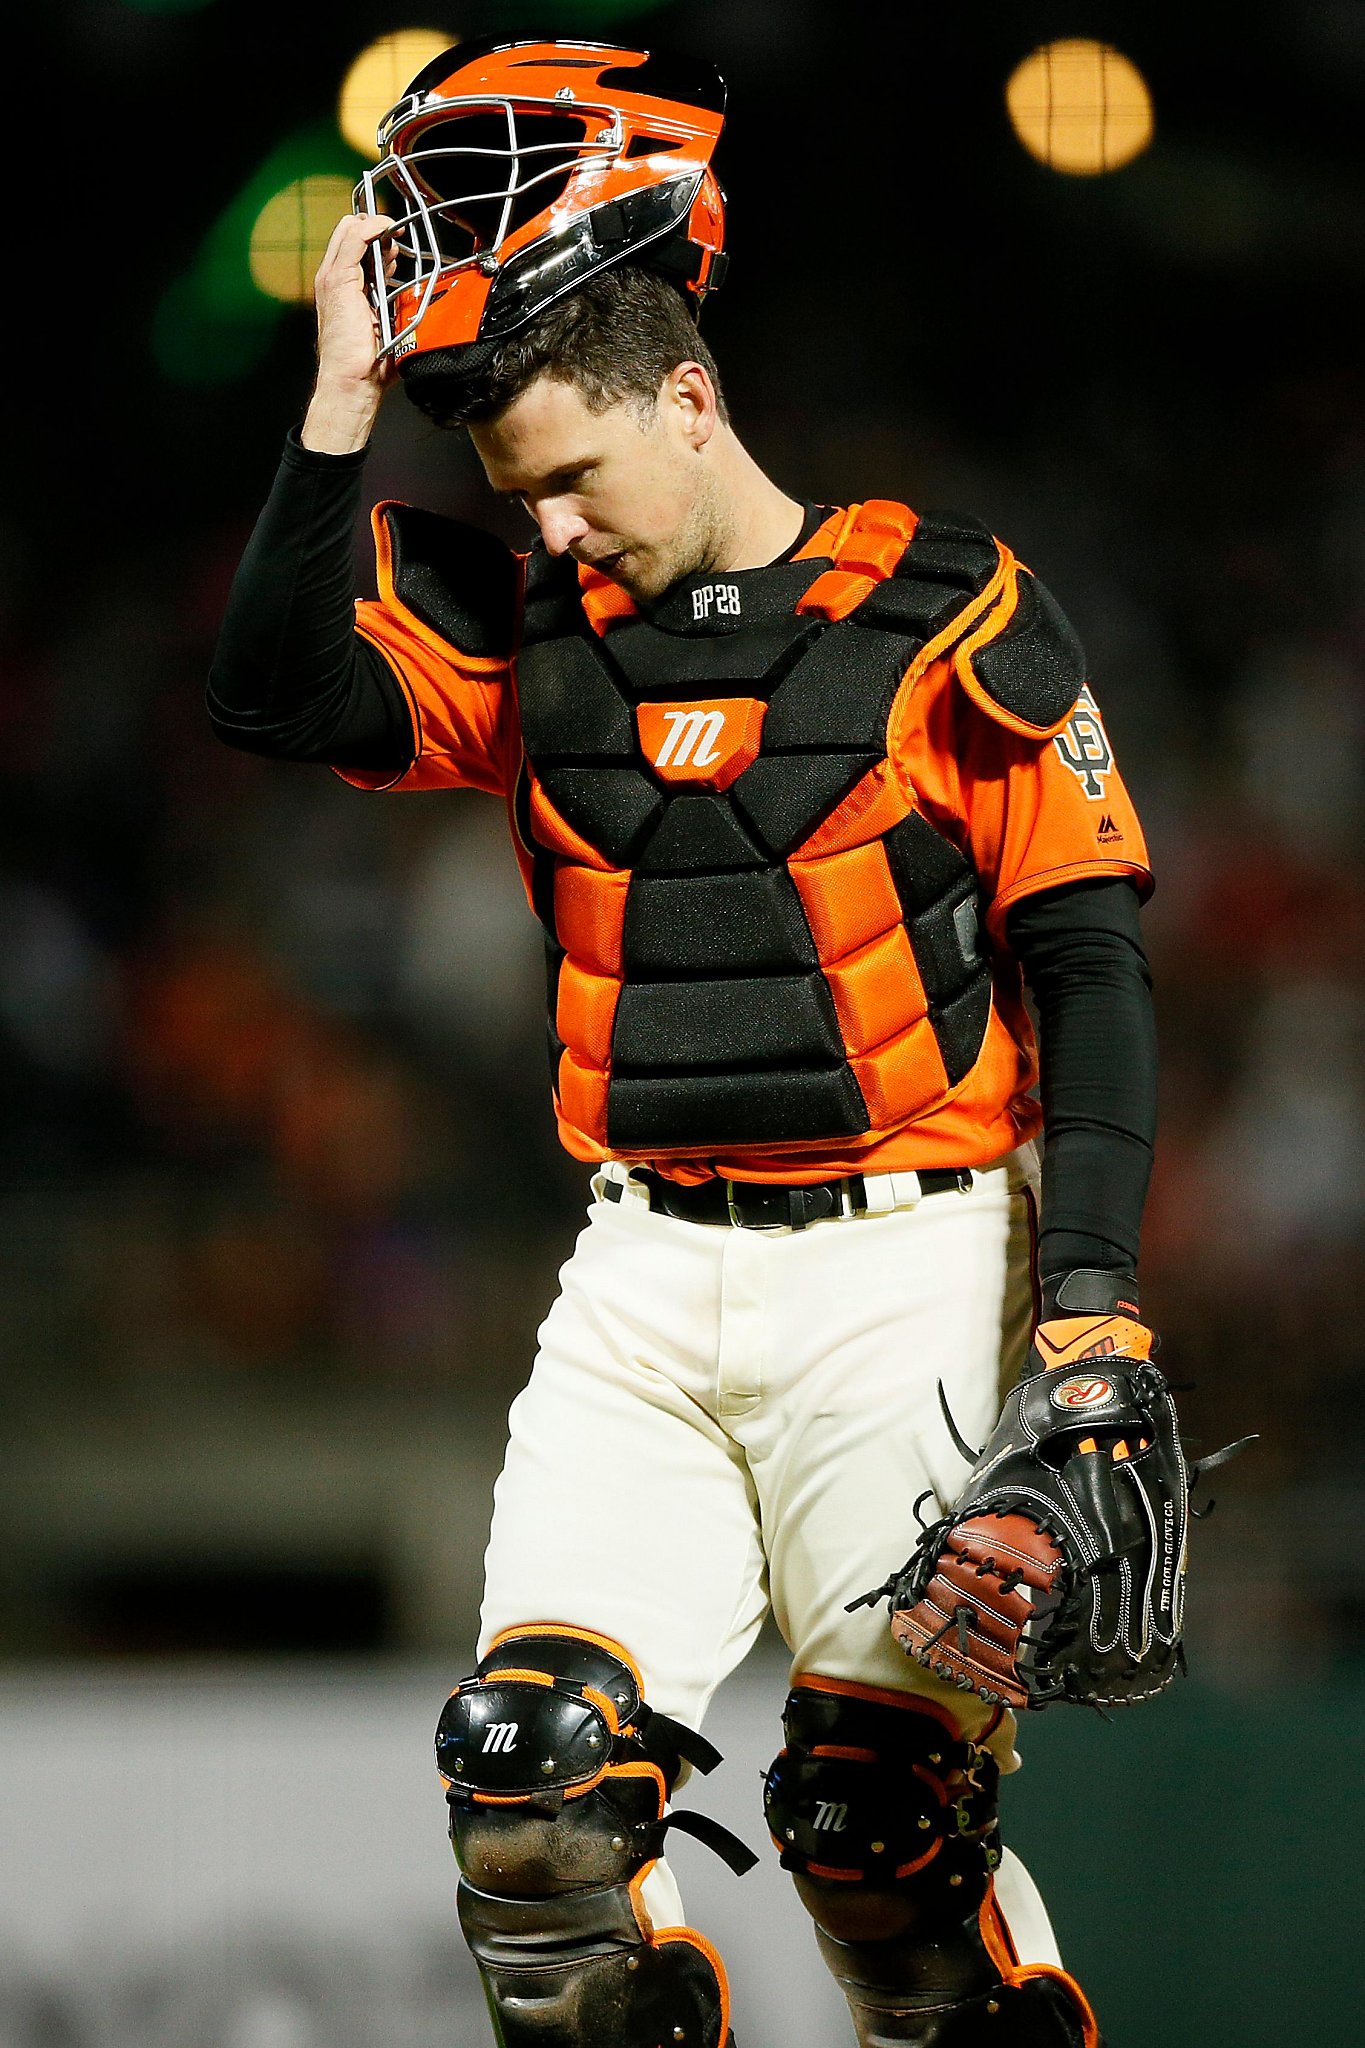 Buster posey Stock Photos, Royalty Free Buster posey Images